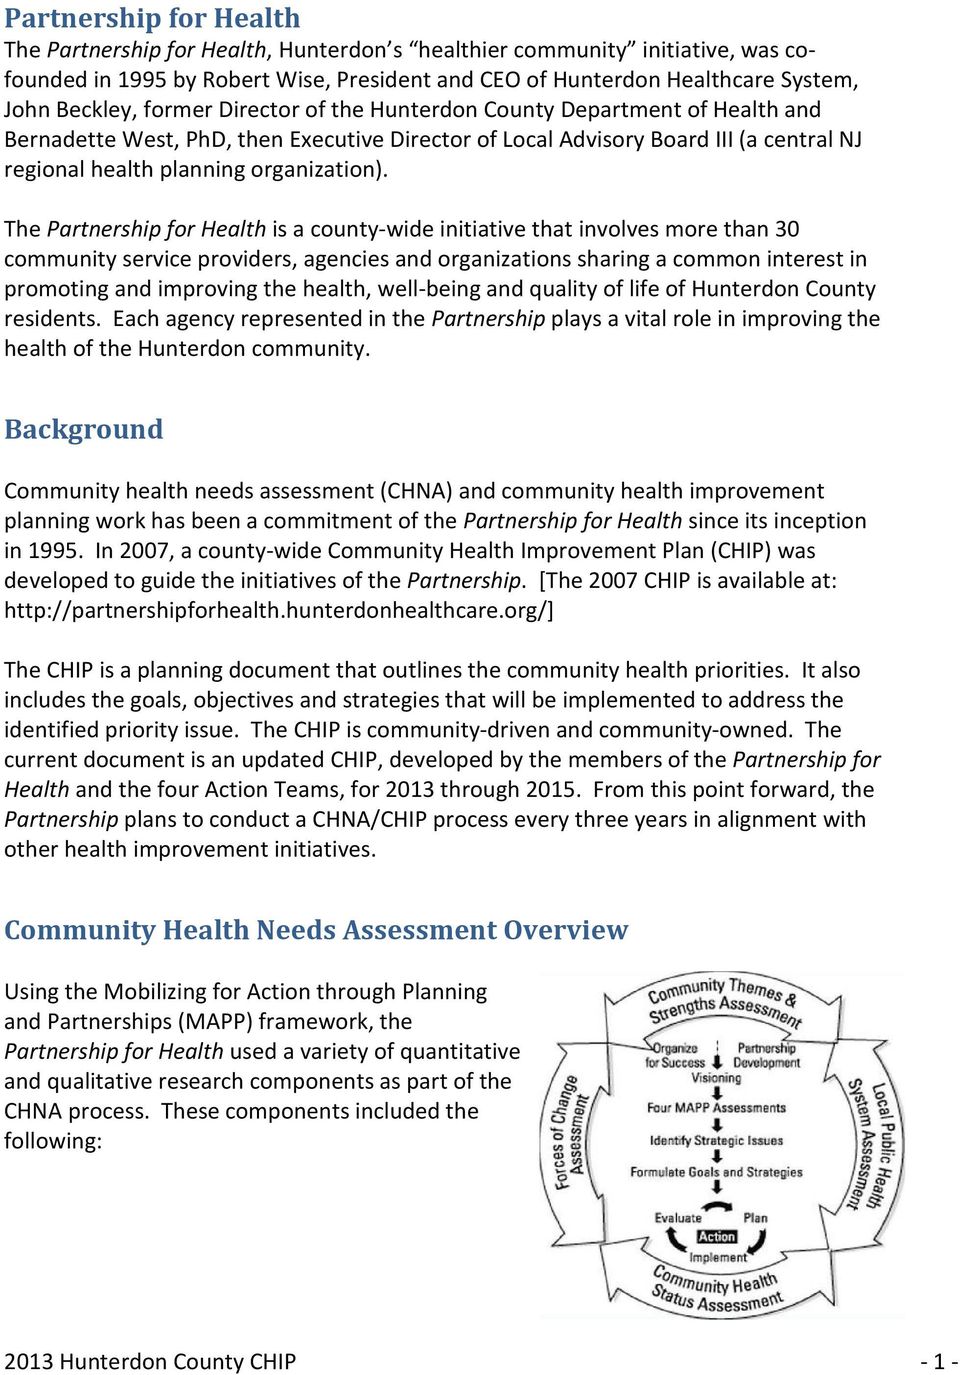 The Partnership for Health is a county-wide initiative that involves more than 30 community service providers, agencies and organizations sharing a common interest in promoting and improving the